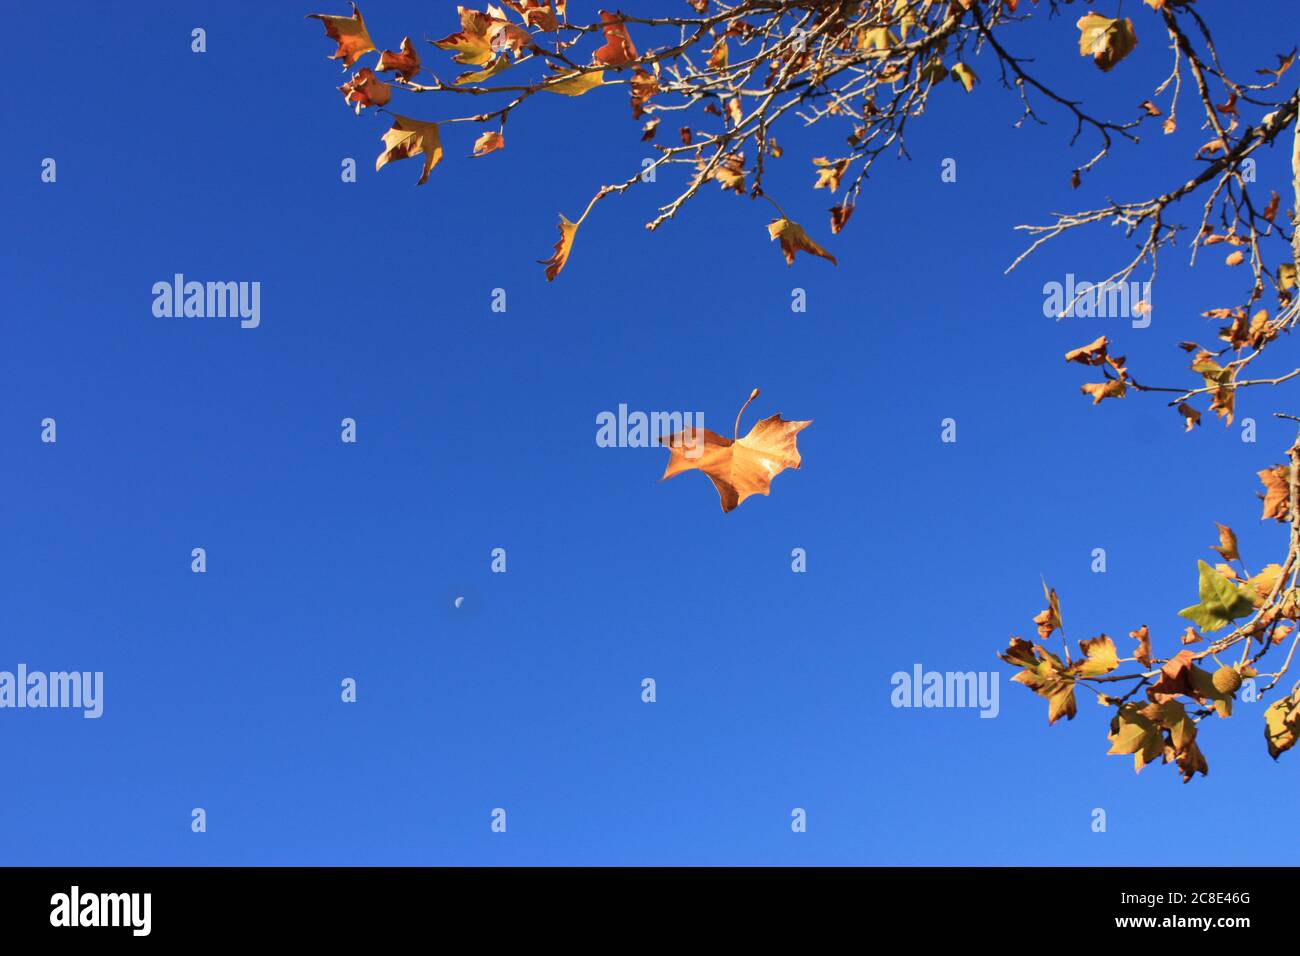 Leaf falling from tree in autumn with moon in daytime sky. Stock Photo